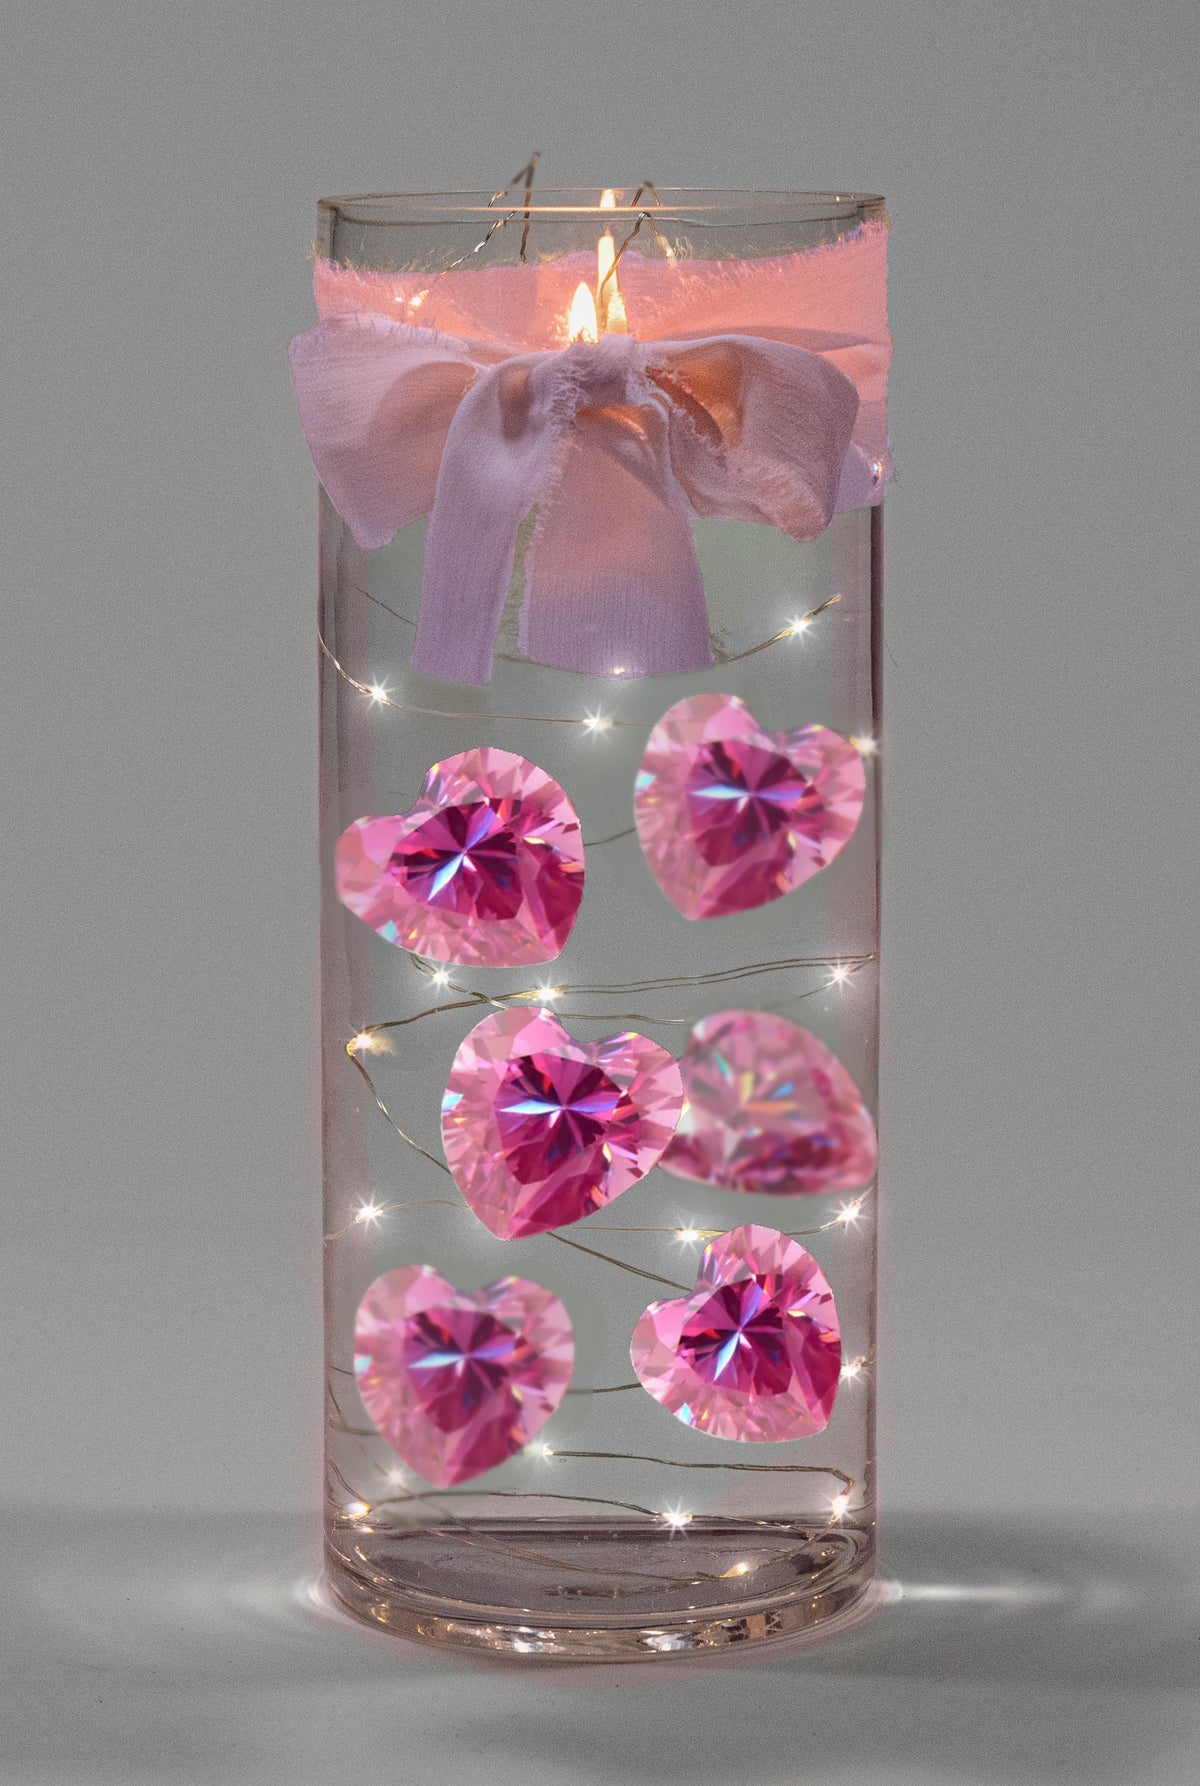 30 Floating Crystal Blush Pink Hearts-Fill 1 Gallon of Transparent Gels for the Floating Effect-With Measured Gels Prep Bag-Option of 3 Submersible Fairy Lights Strings